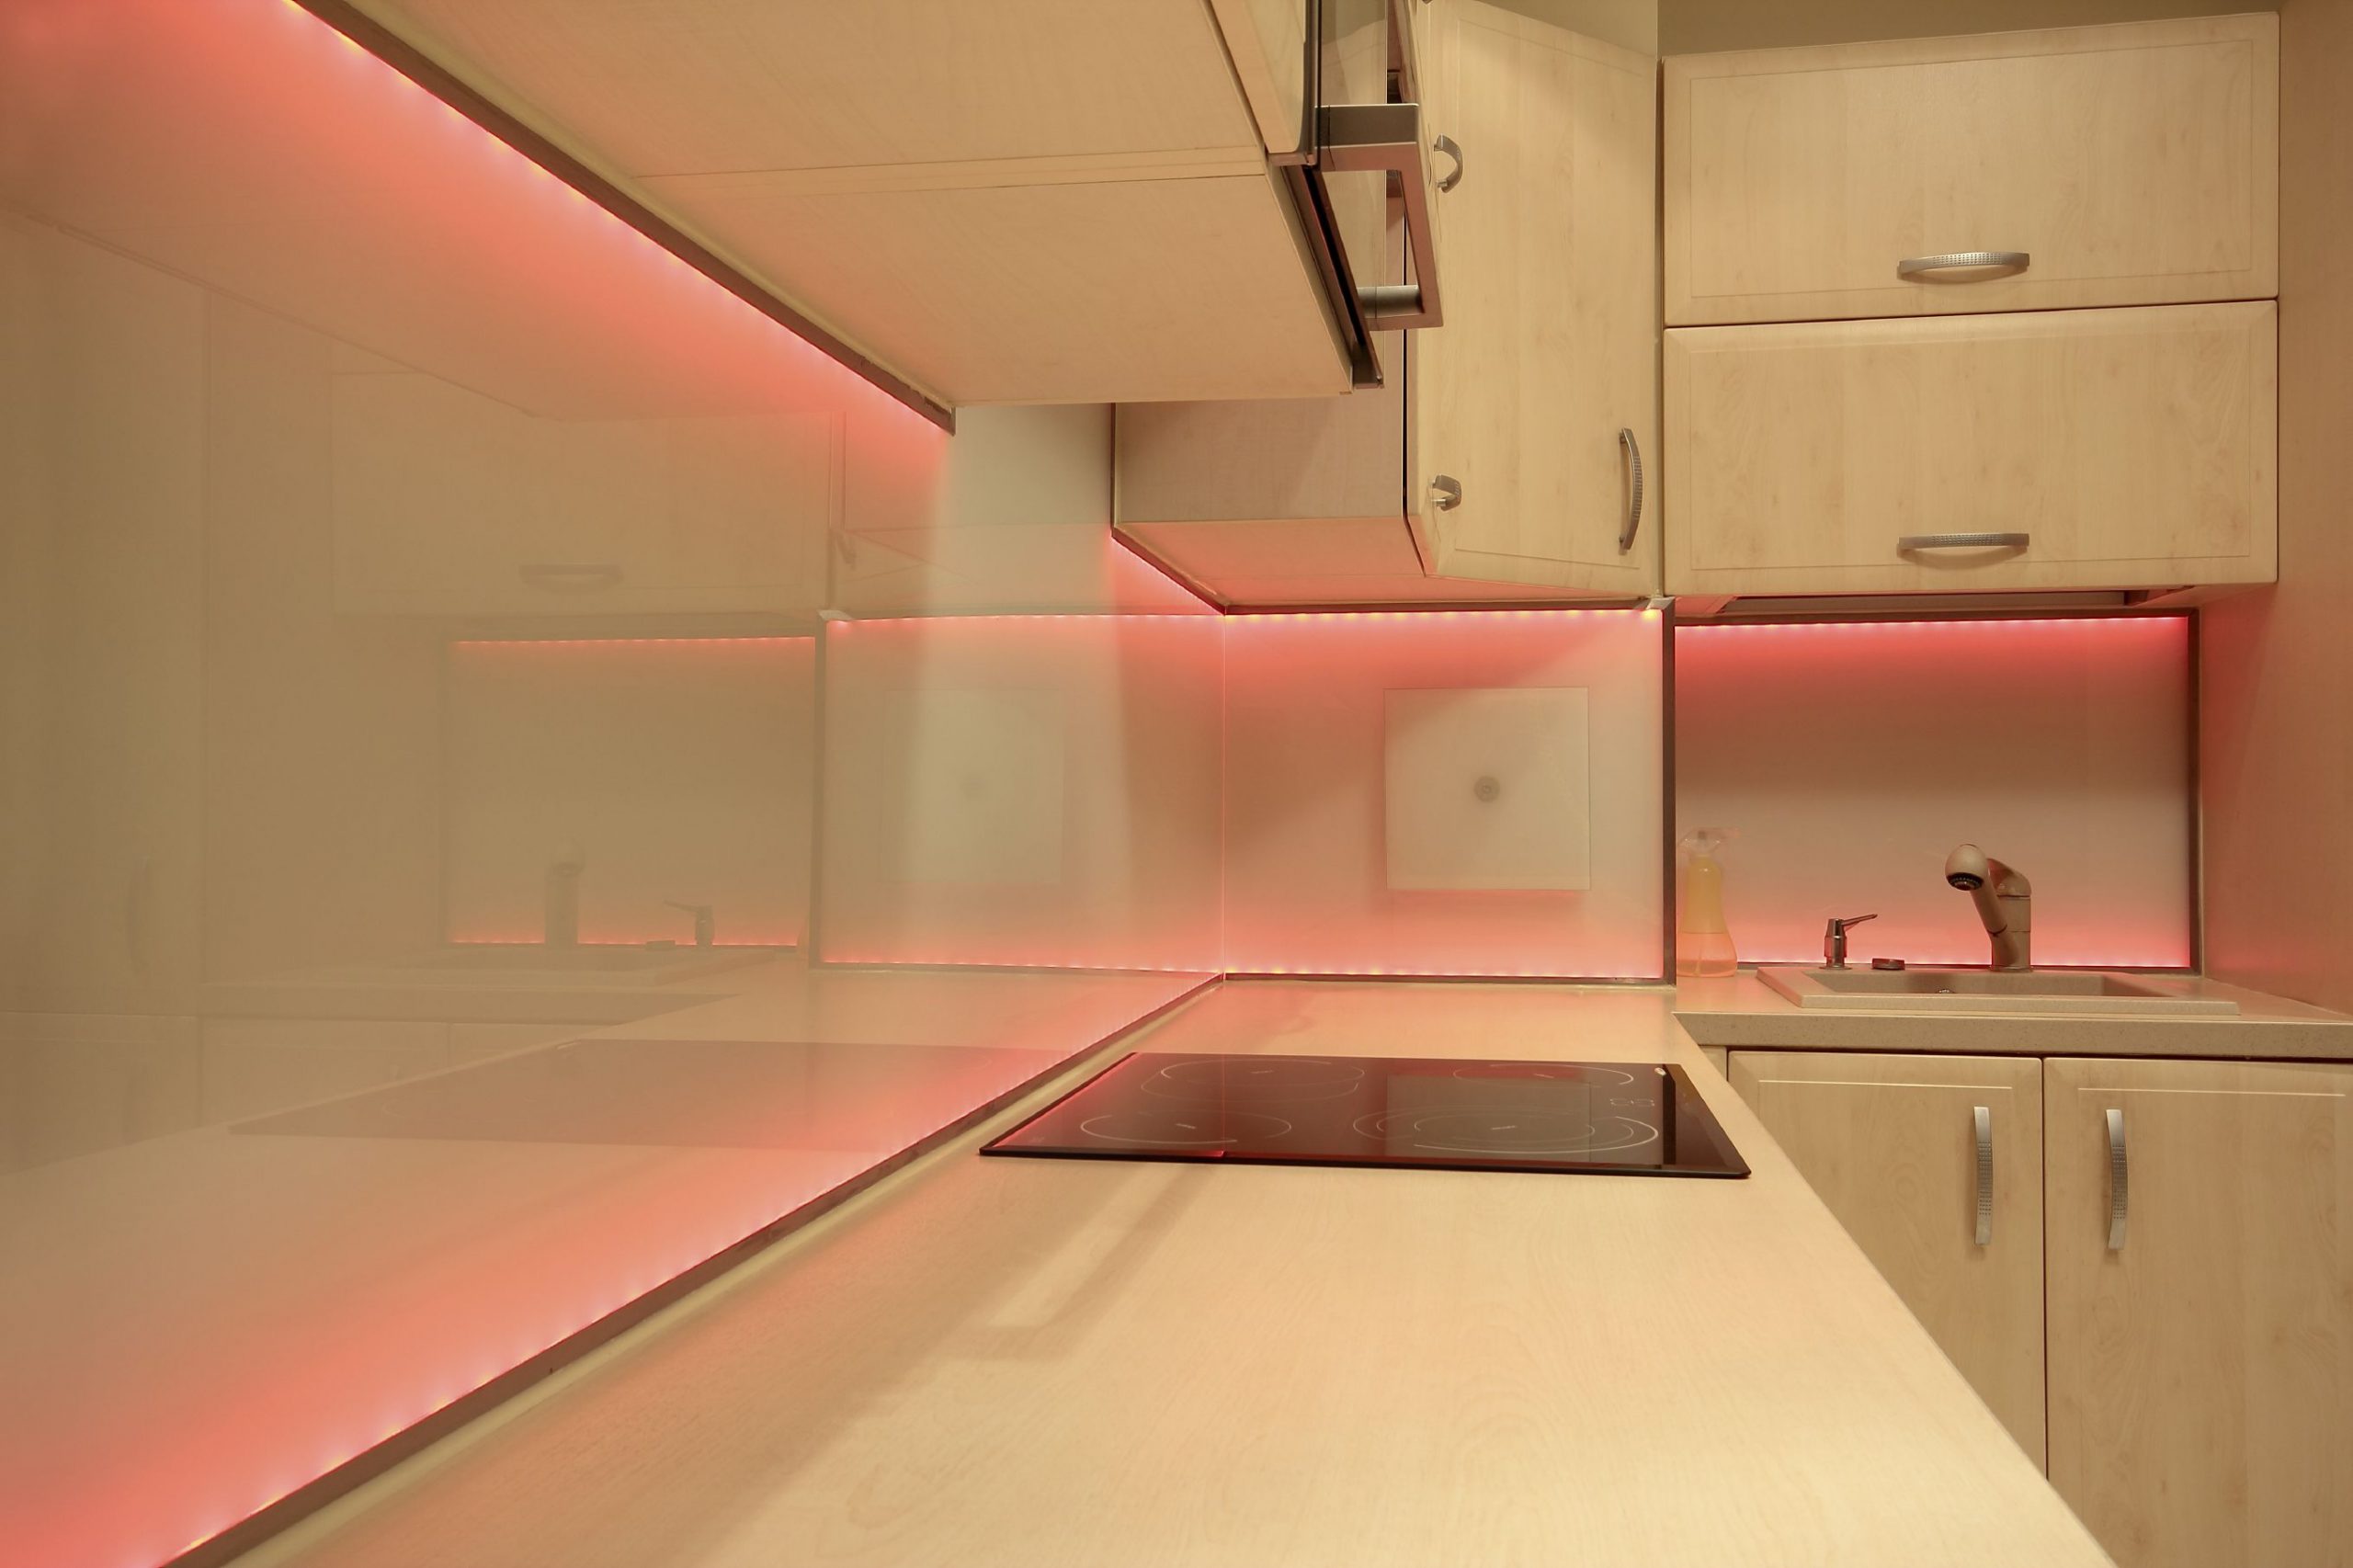 Modern luxury kitchen with red LED lighting